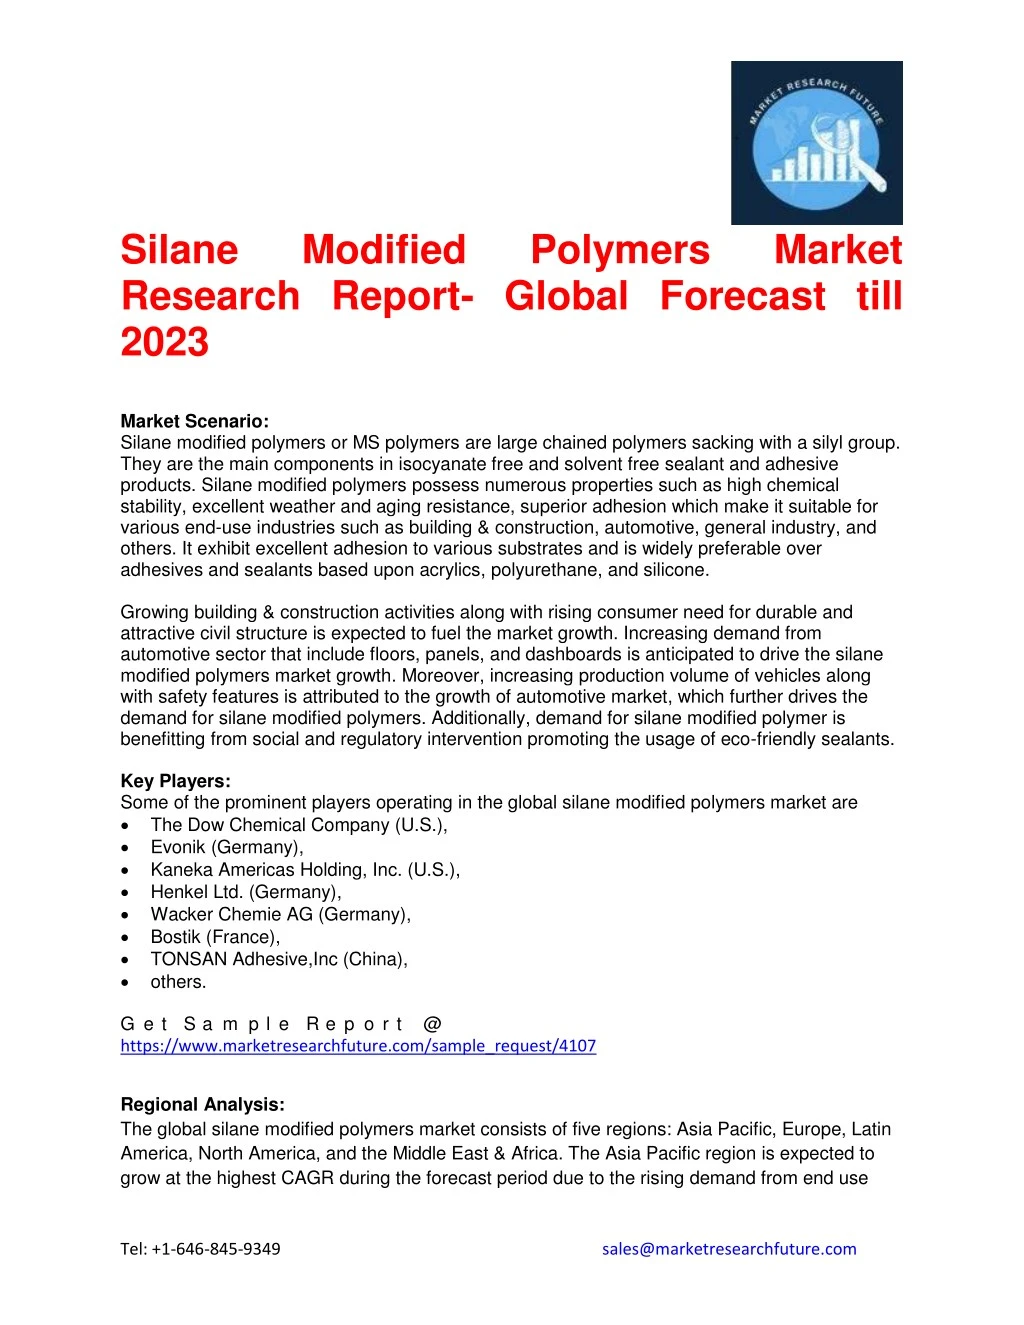 silane research report global forecast till 2023